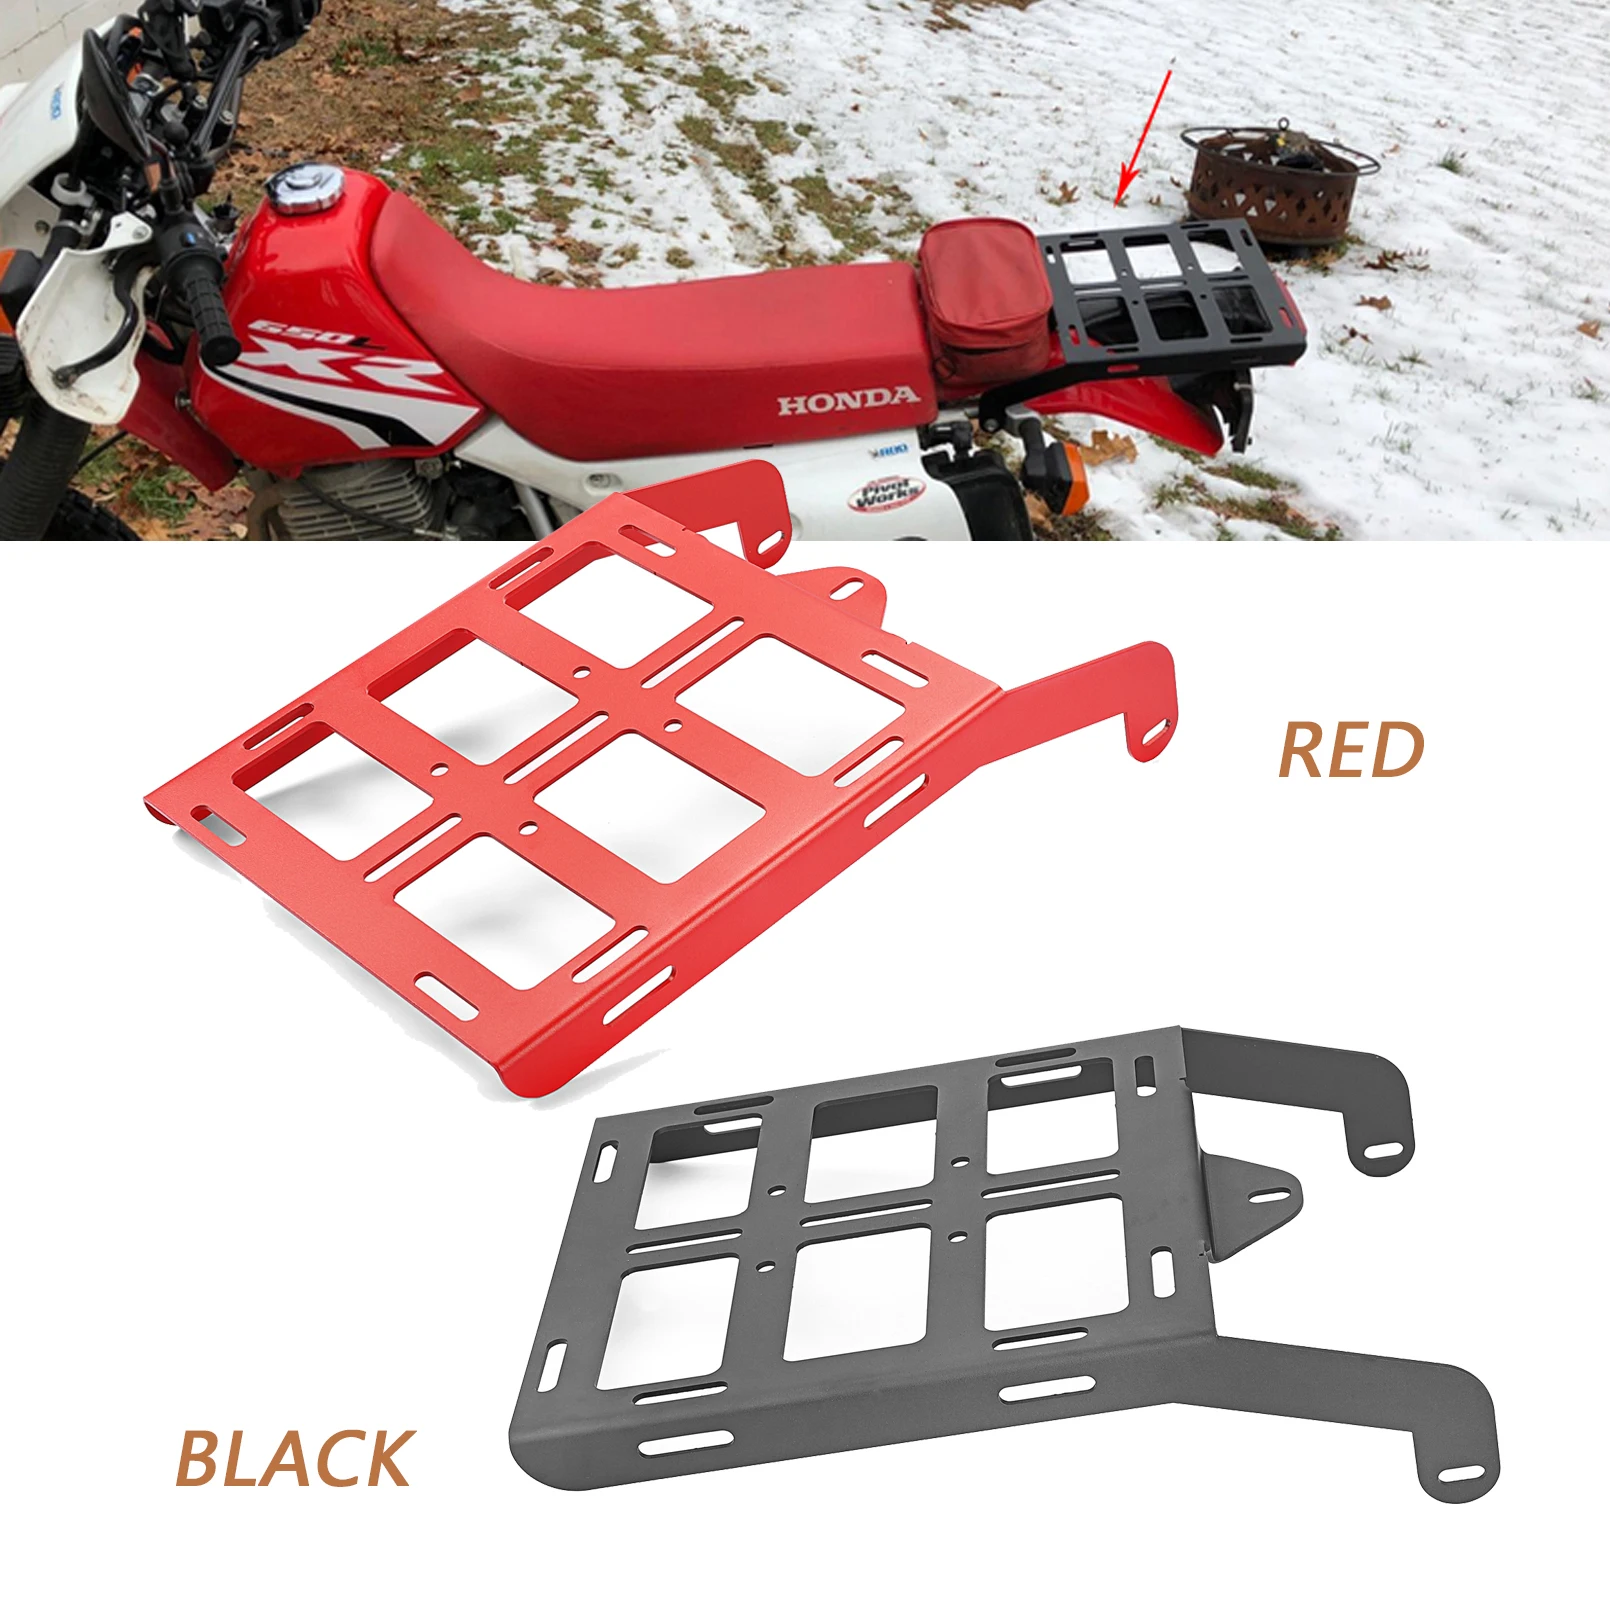 WSays Red Rear Tail Luggage Carrier Rack Compatible with 1993-2016 Honda XR650L